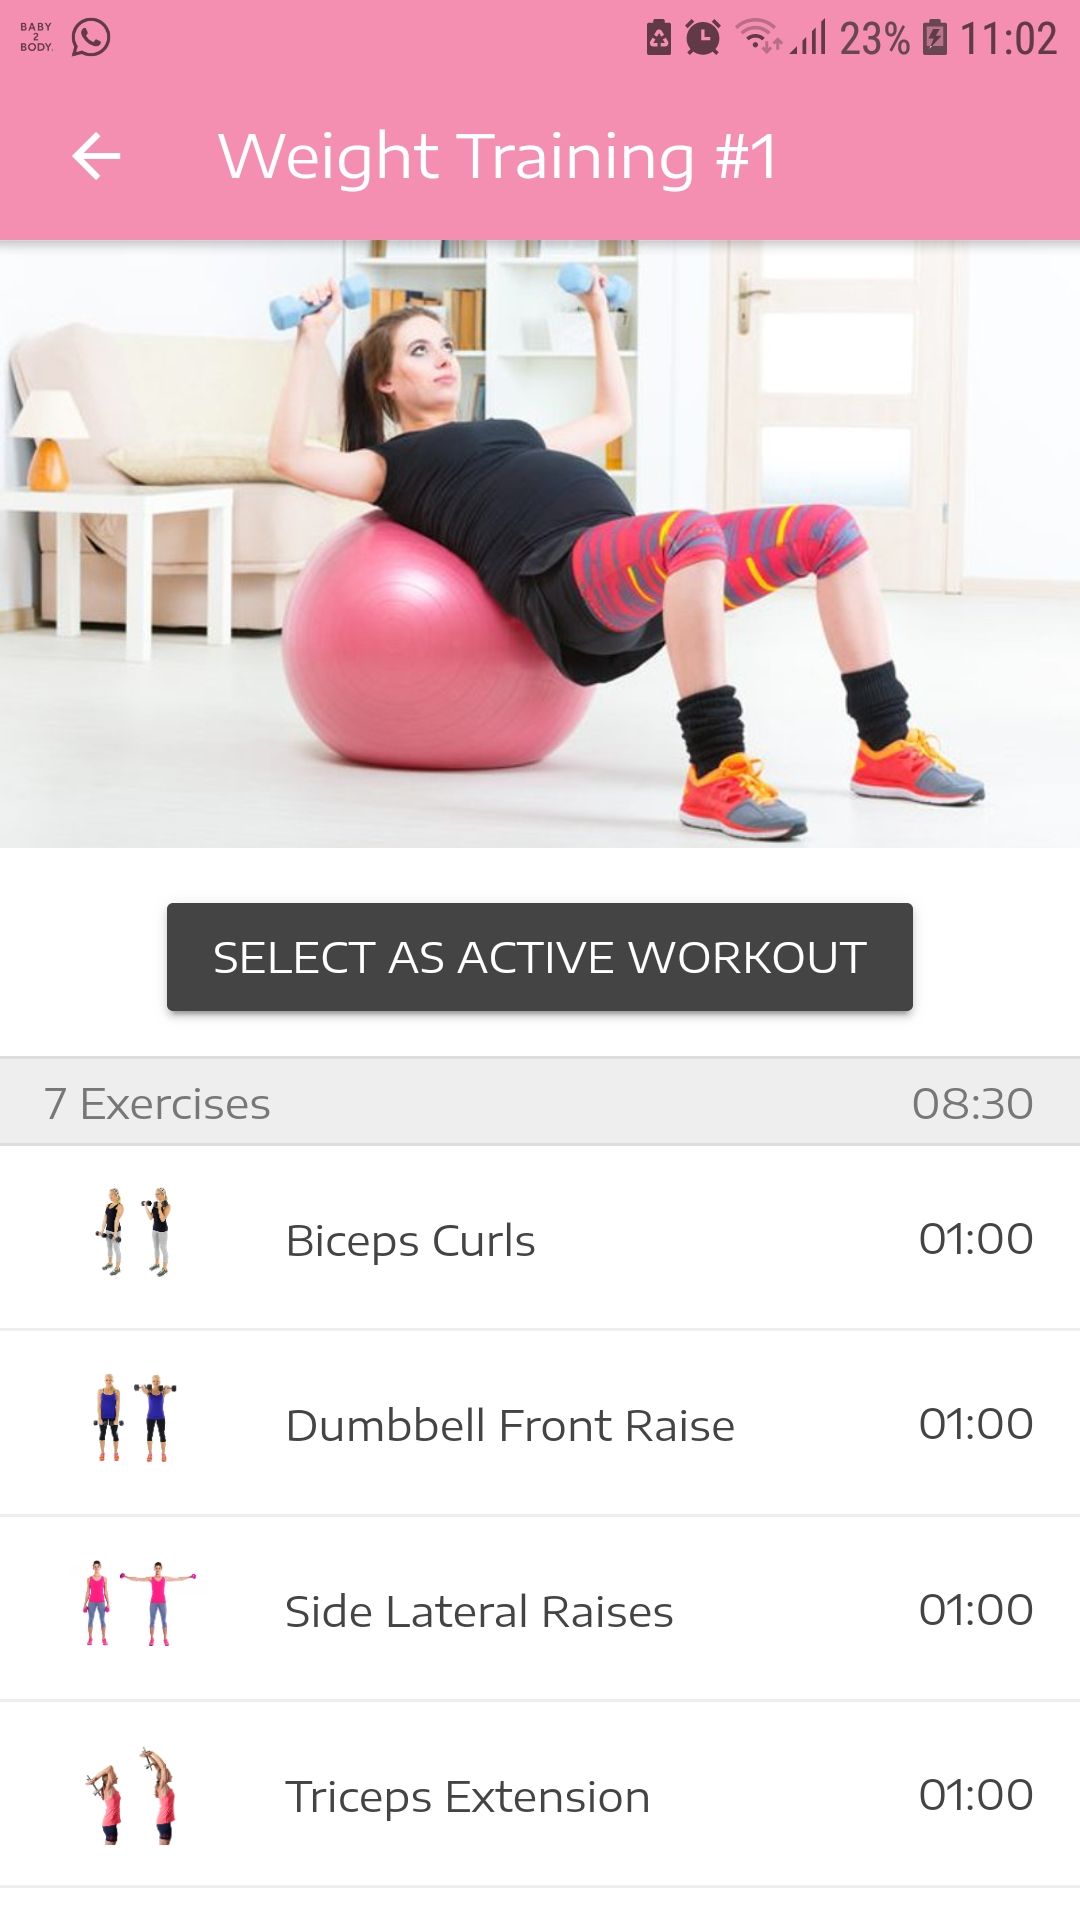 Exercise During Pregnancy mobile prenatal app weight training